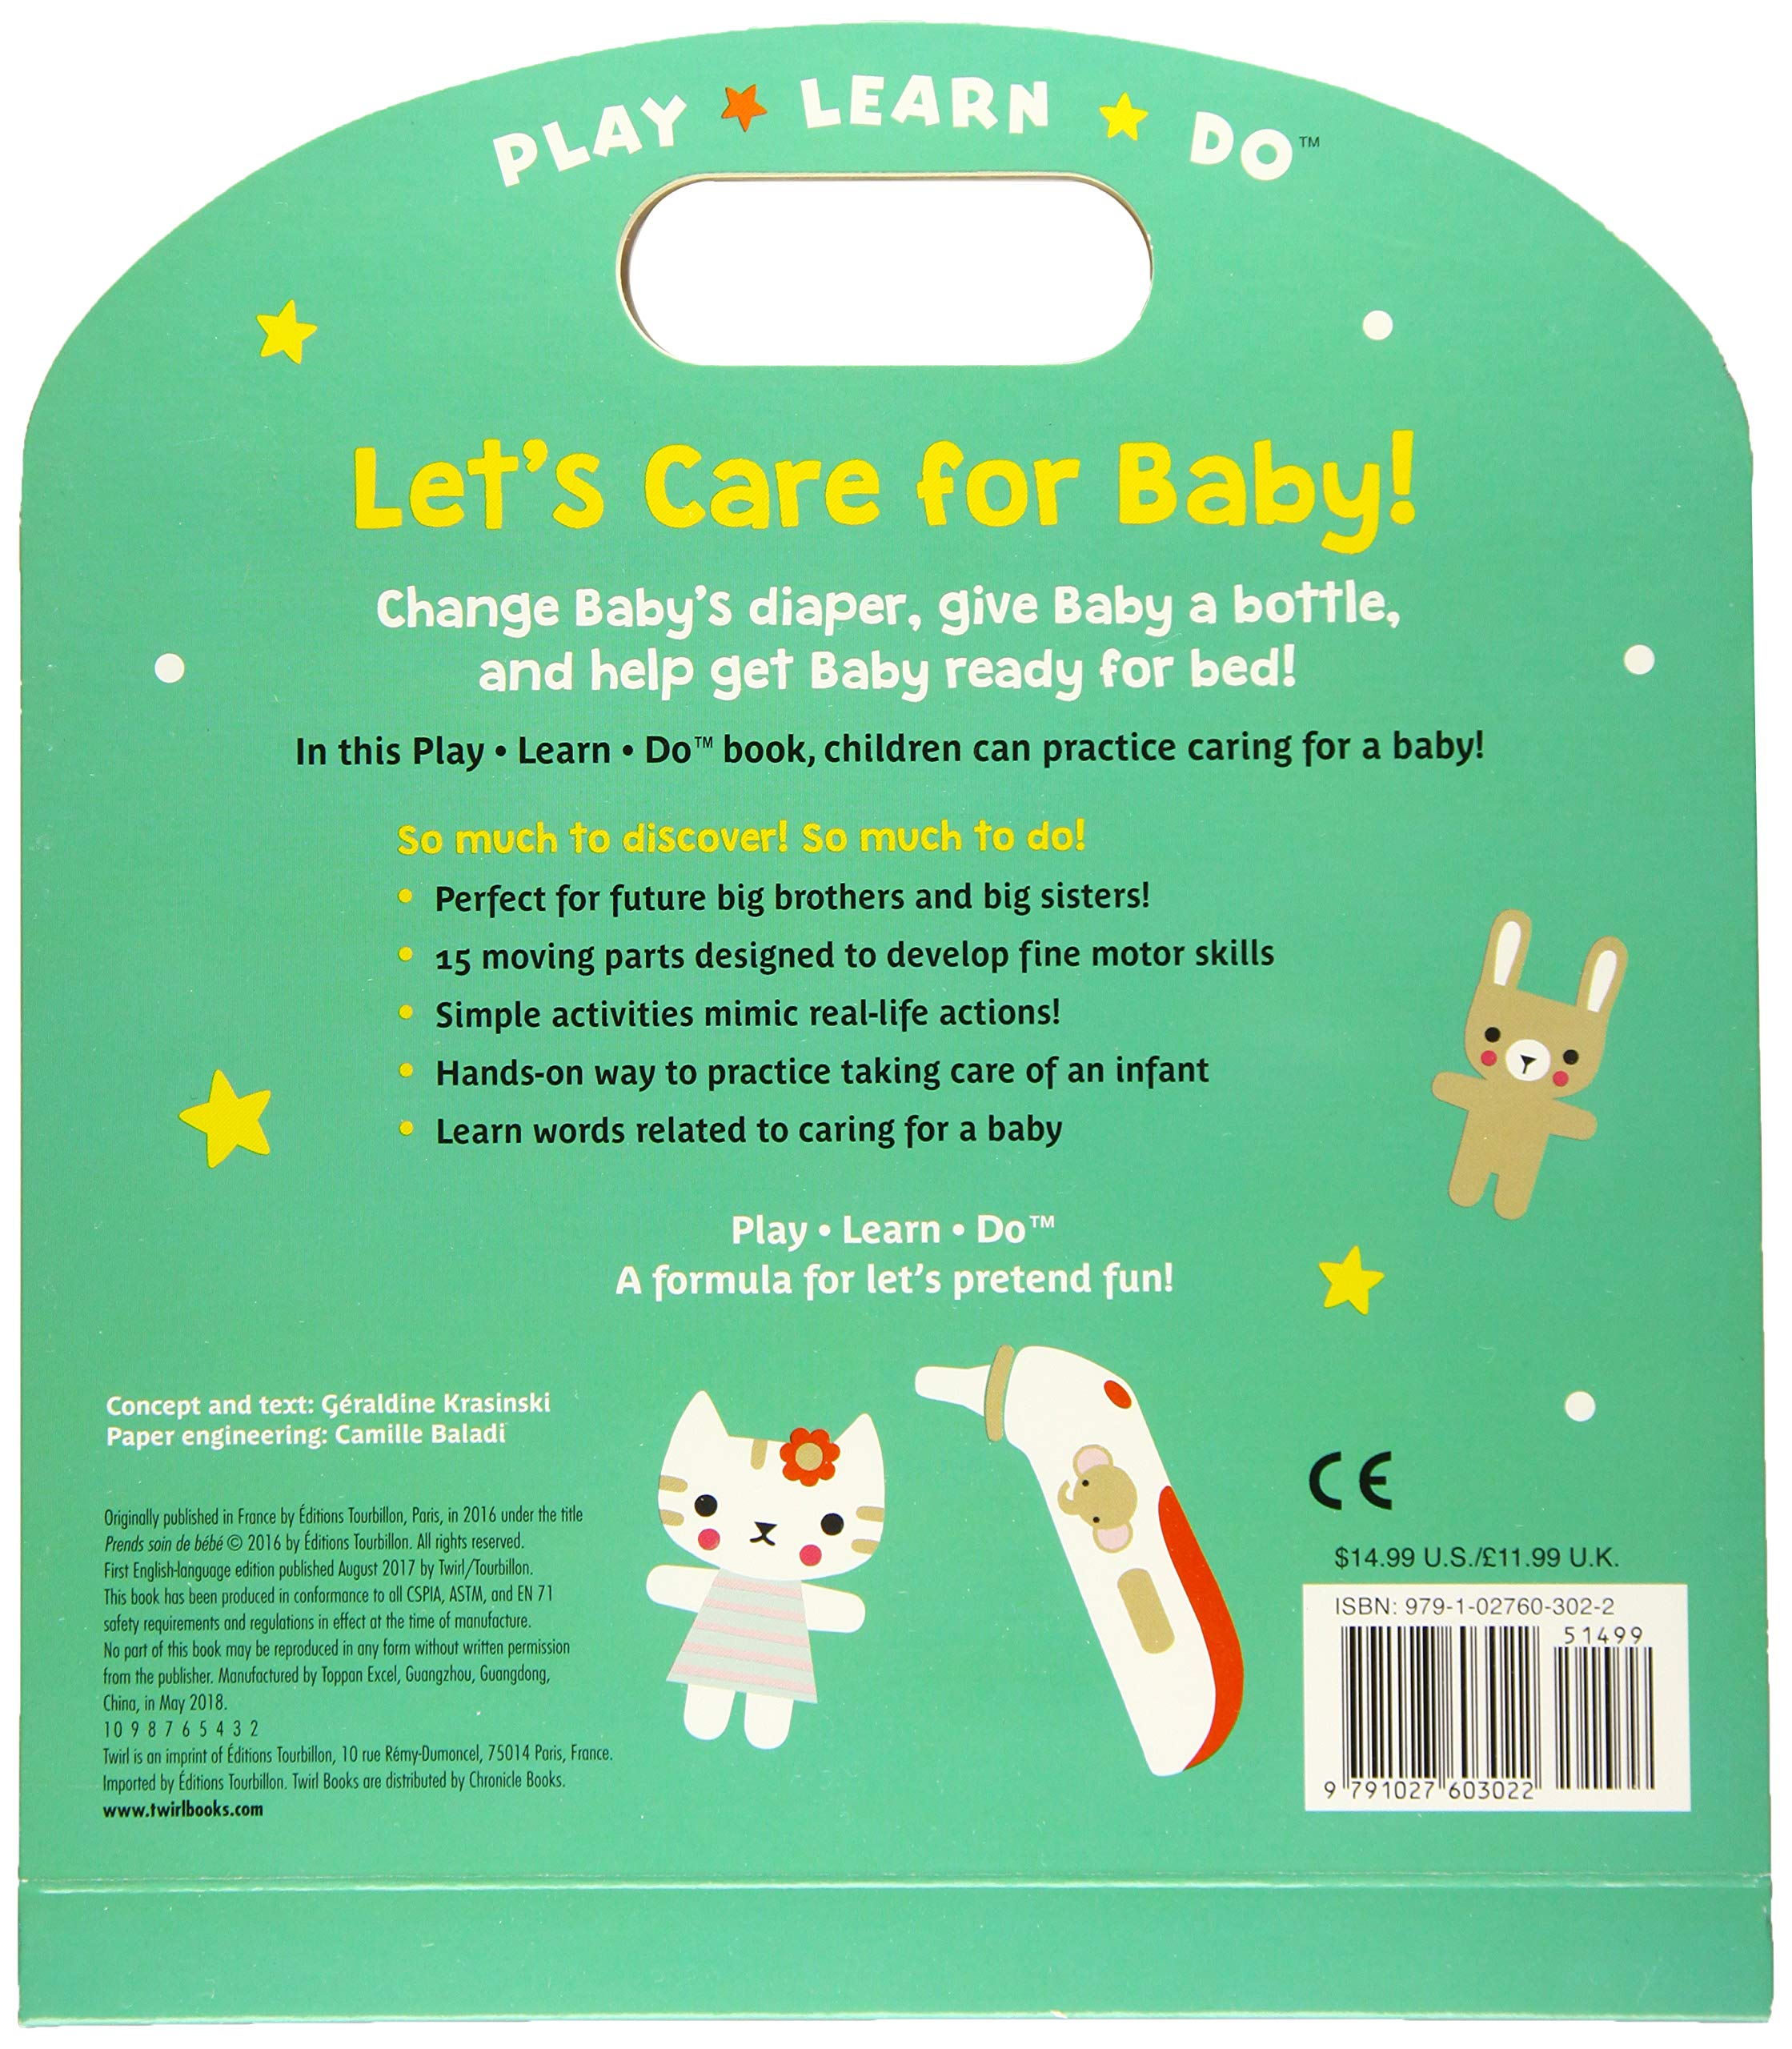 Let's Care for Baby! Board Book - Twinkle Twinkle Little One